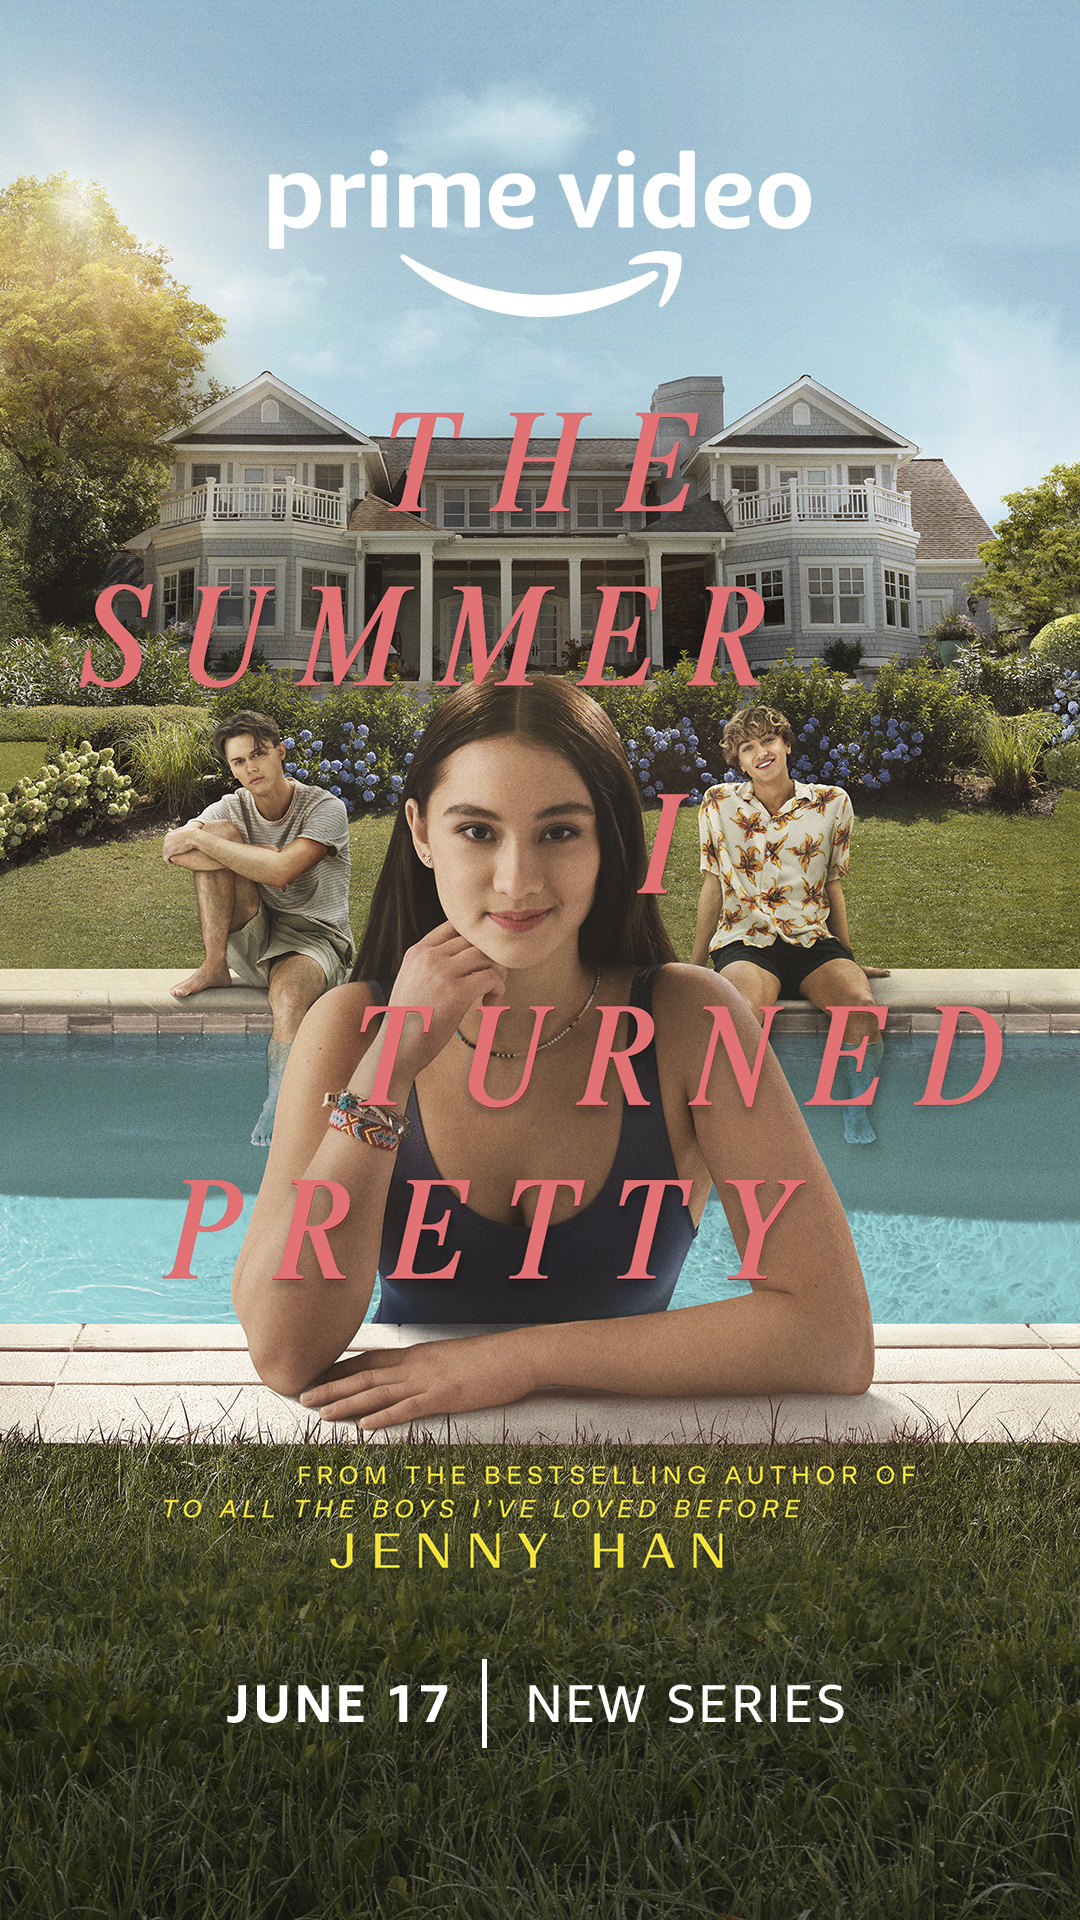 Prime Video Releases Teaser for “The Summer I Turned Pretty” ahead of June Premiere